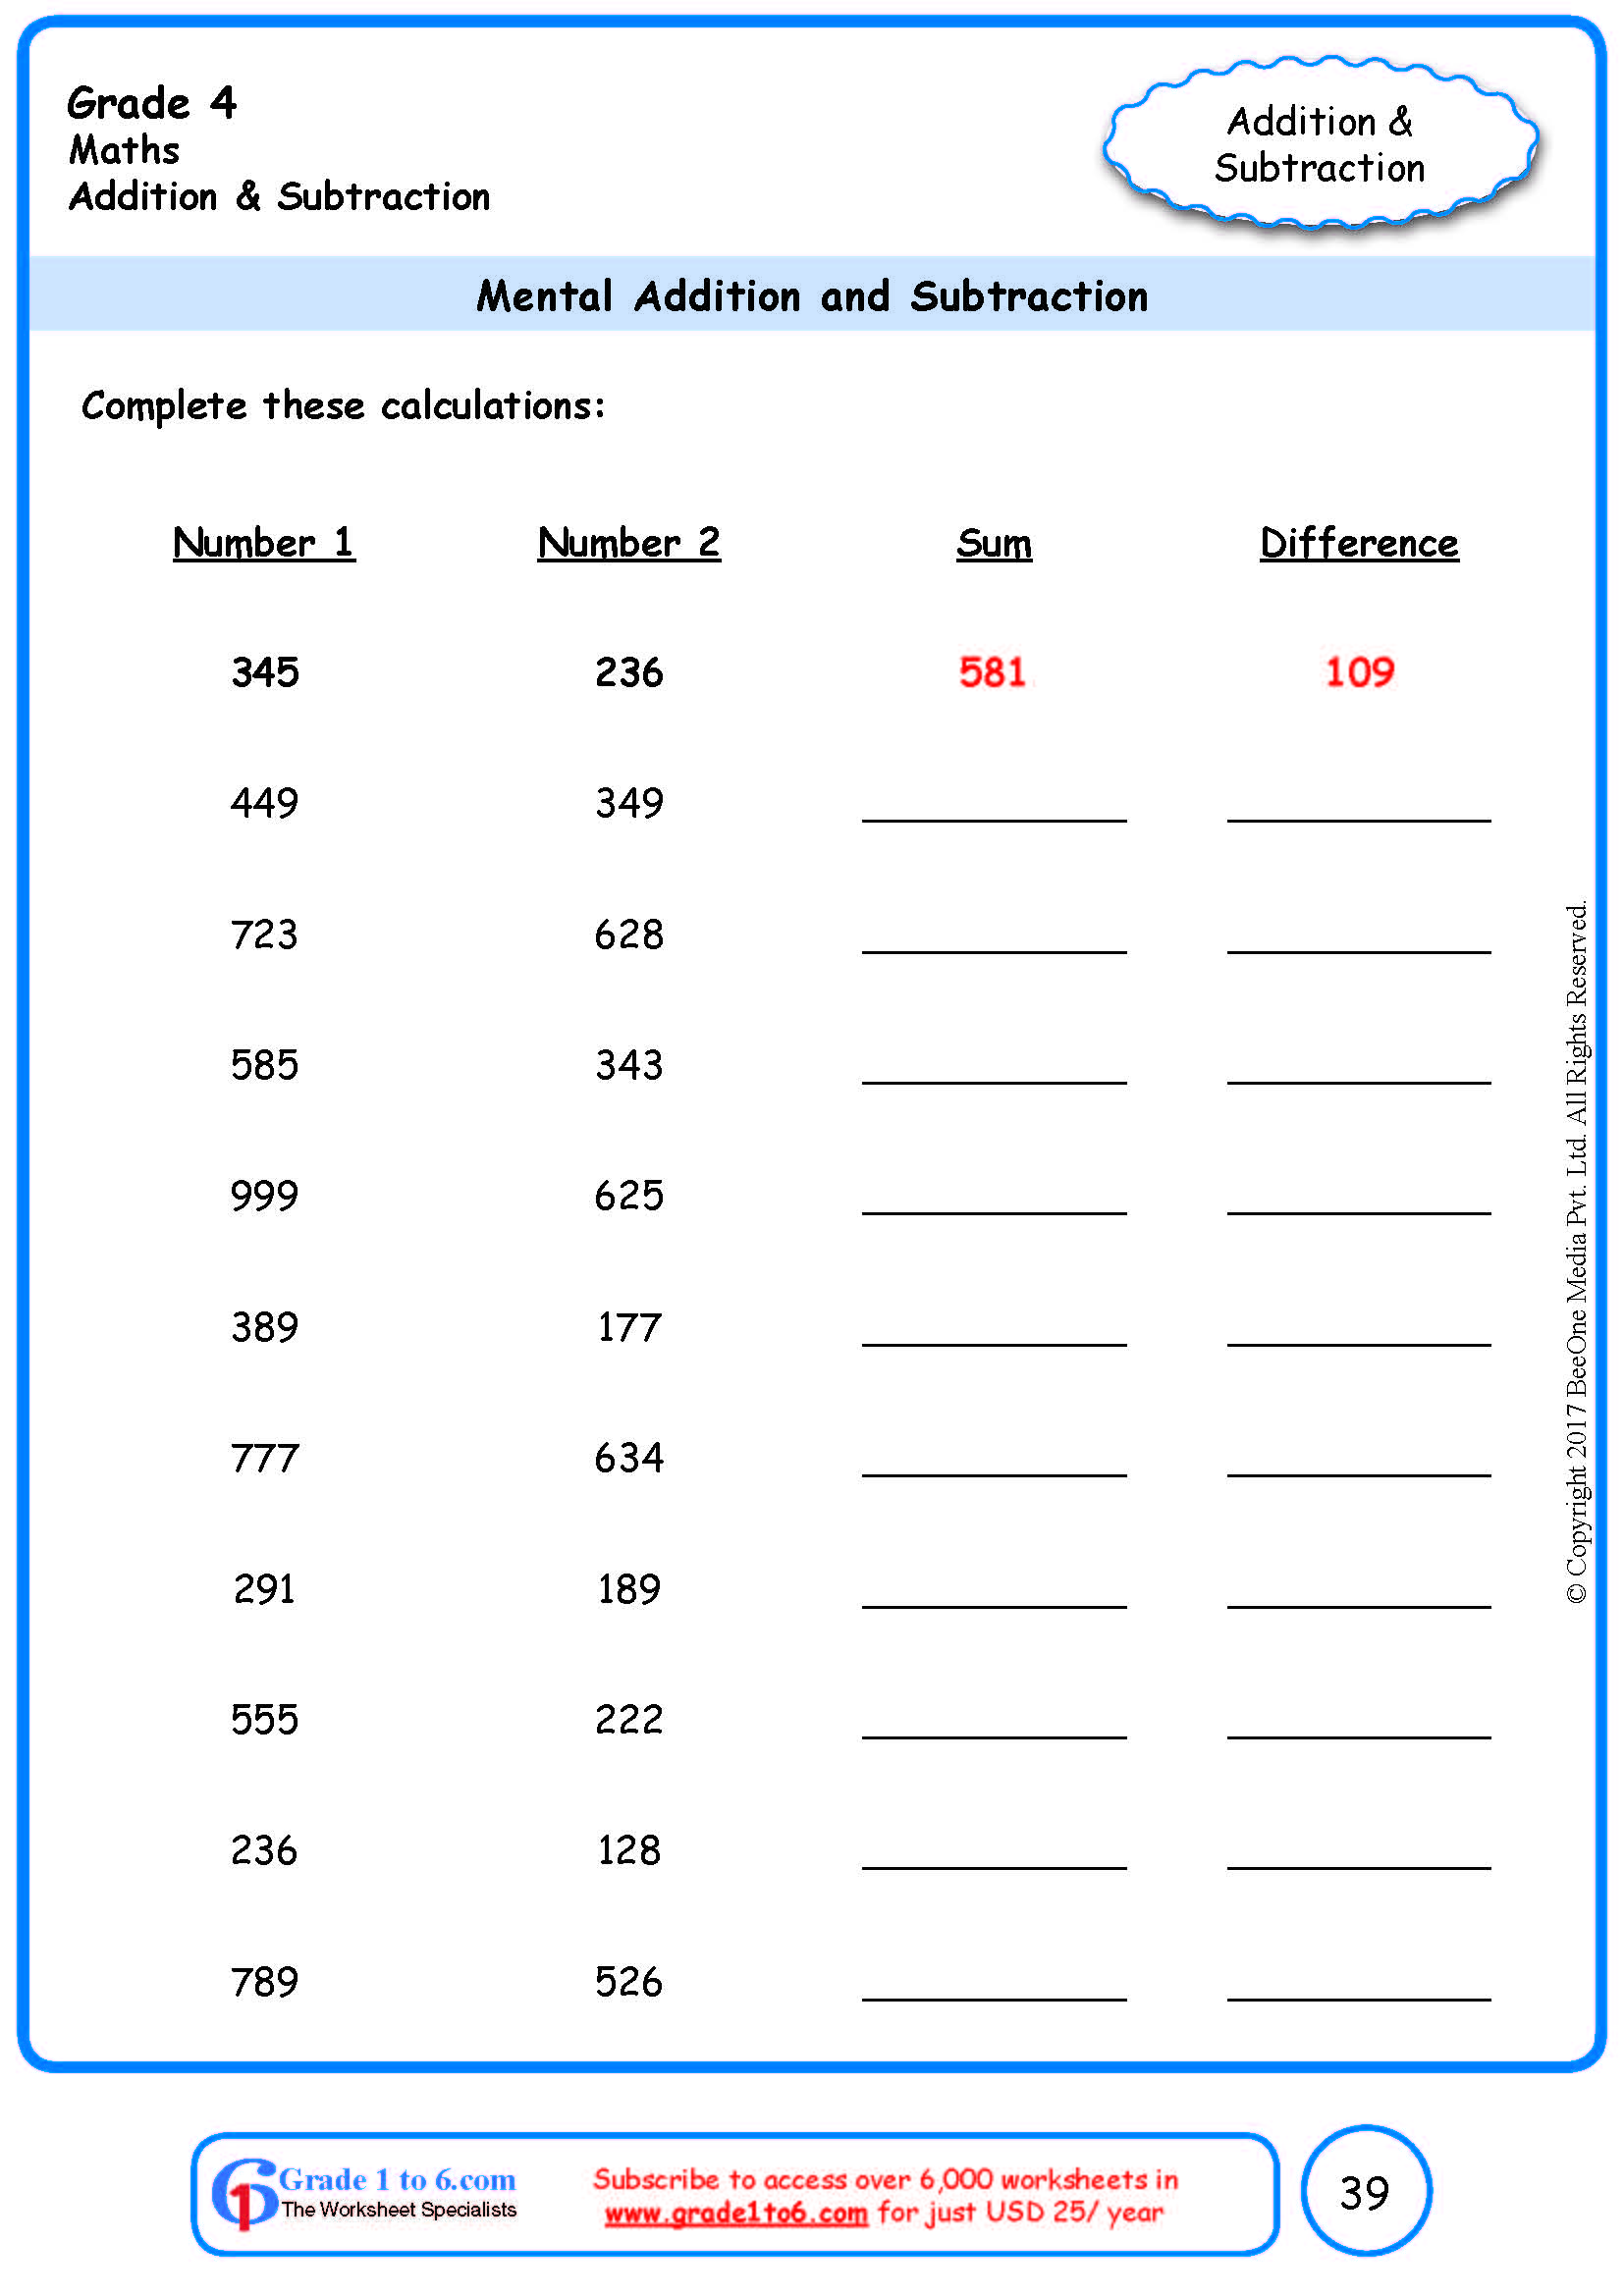 mental-math-addition-subtraction-worksheets-www-grade1to6